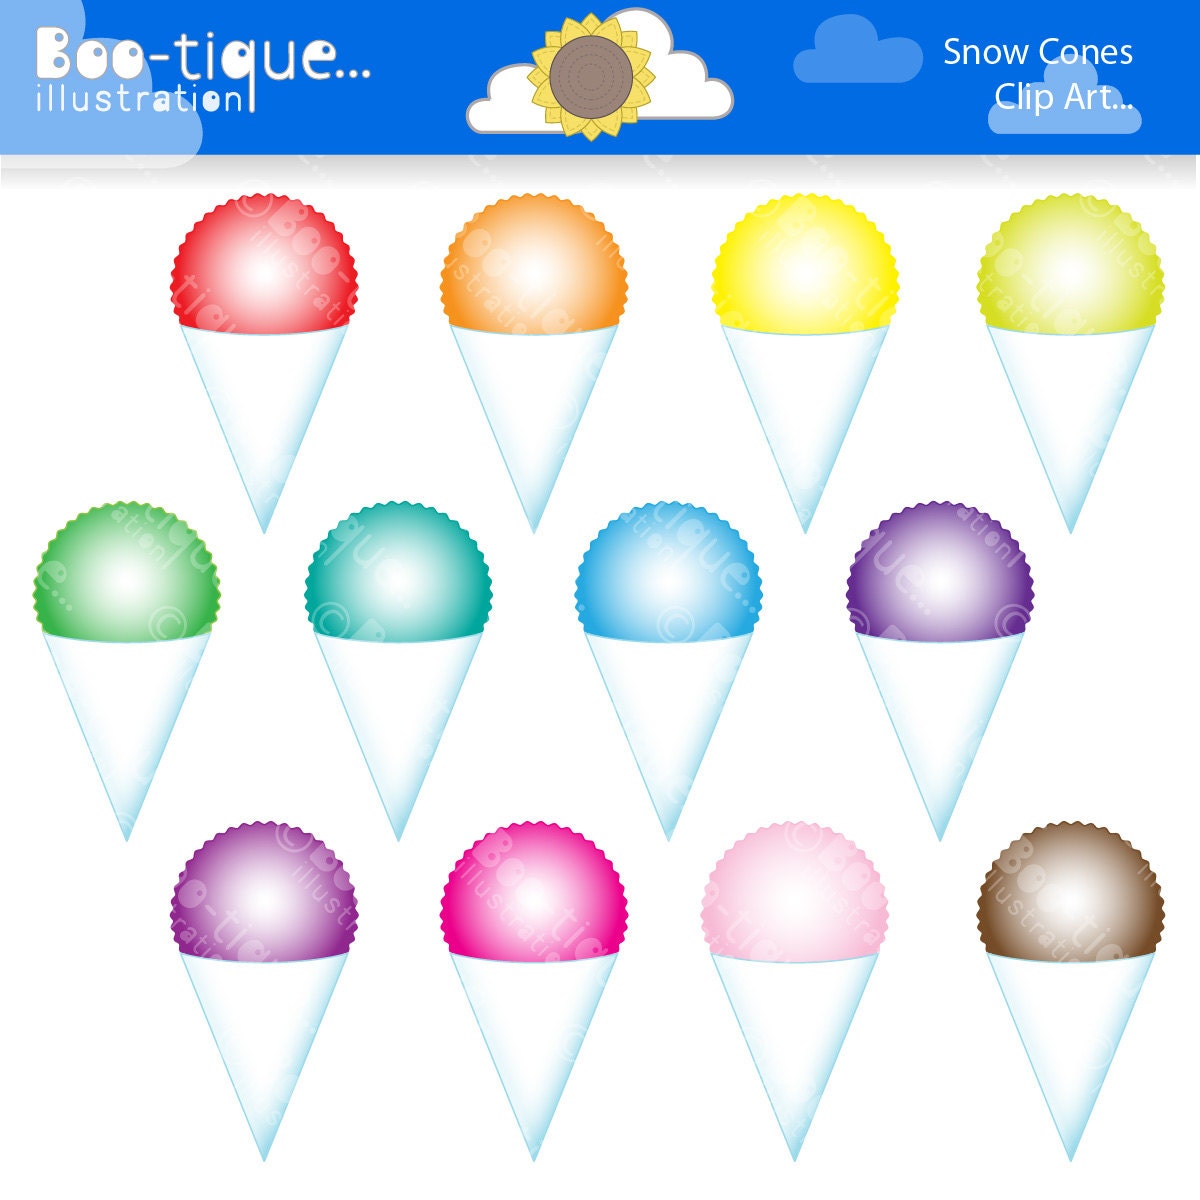 Snow Cones DIgital Clipart for Instant Download. Snow ...